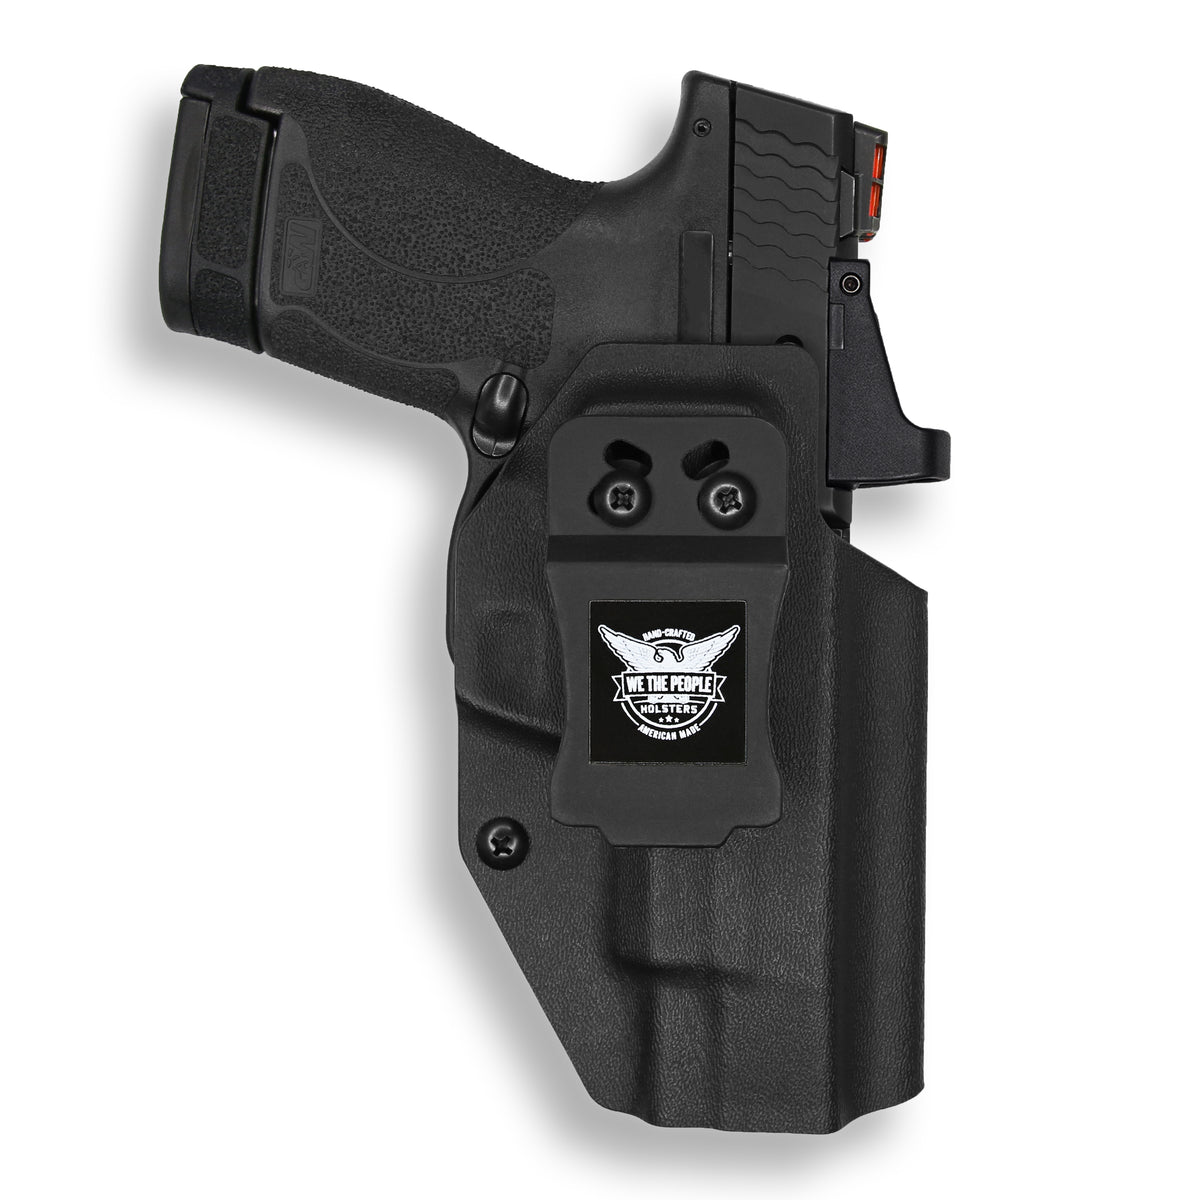 NEW IWB Holster For Smith & Wesson M&P Shield 9mm & 40 Cal 